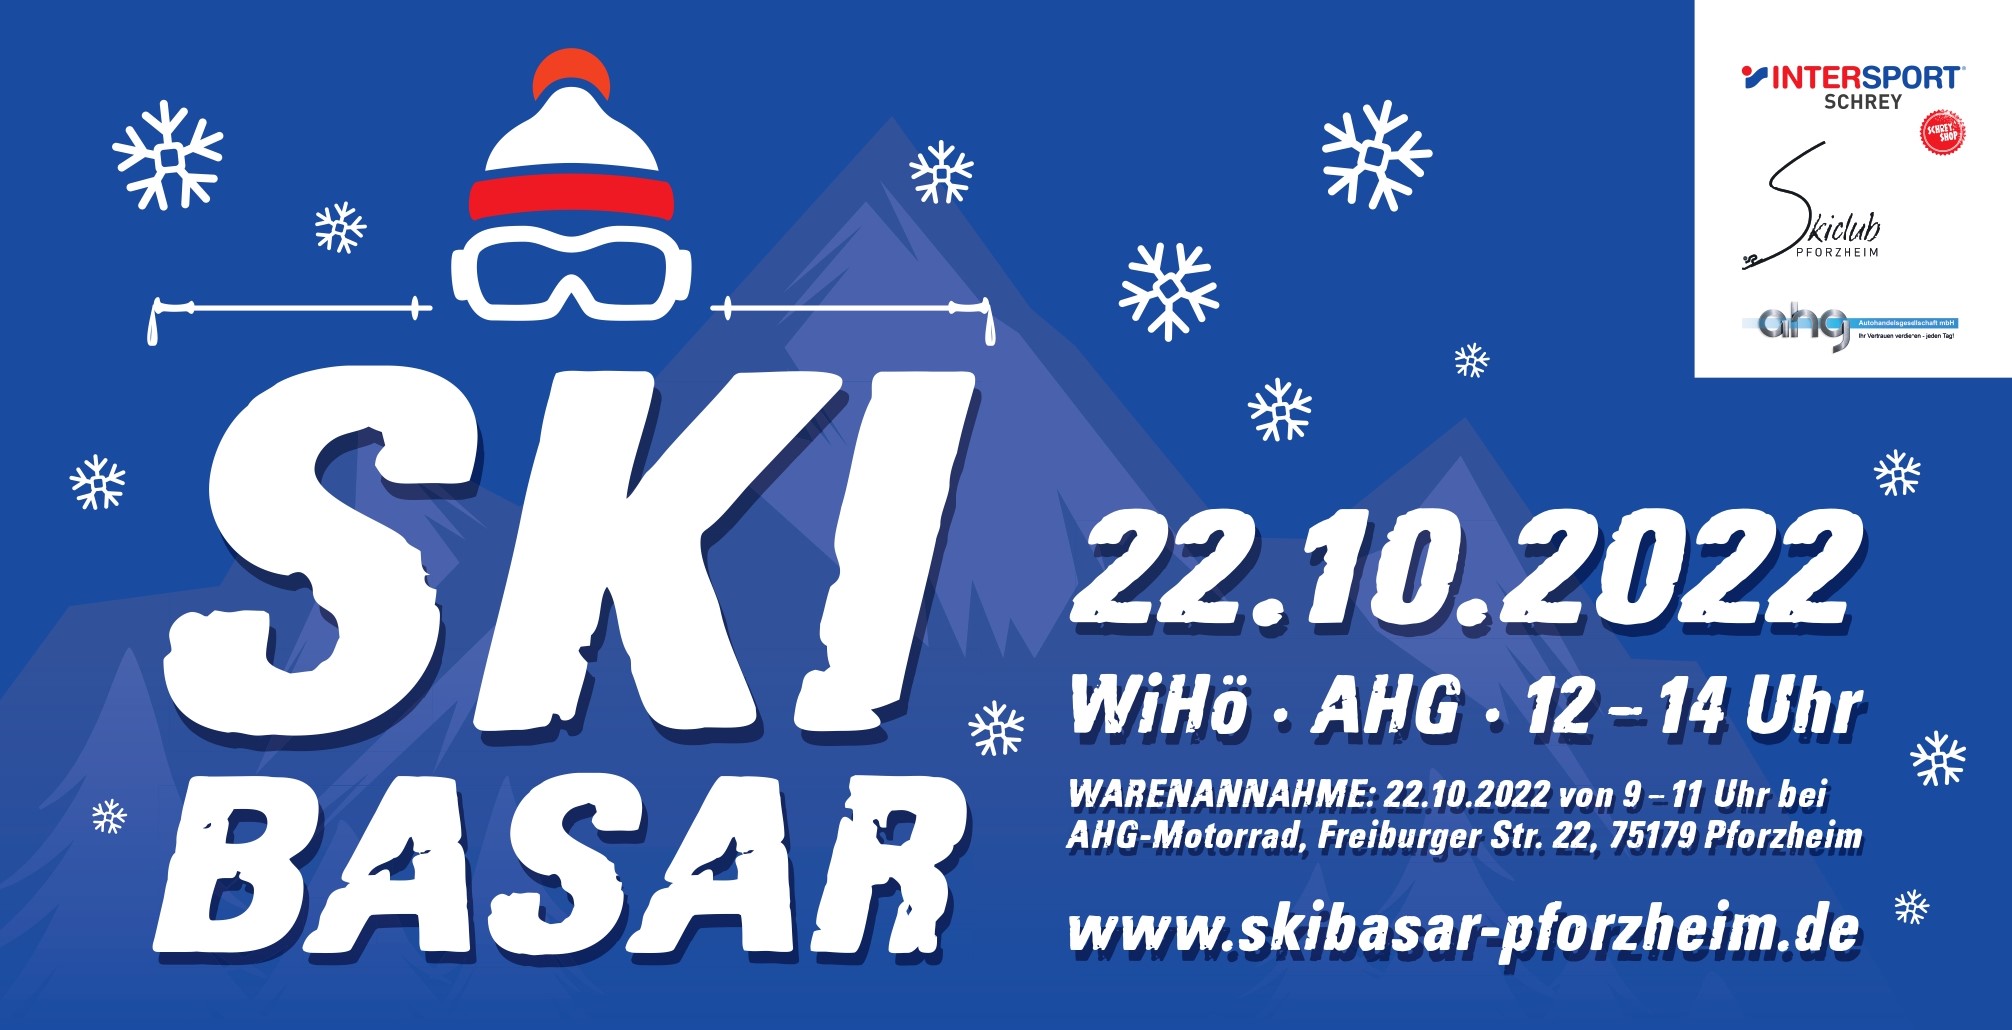 Save the Date: Skibasar 22.10.2022